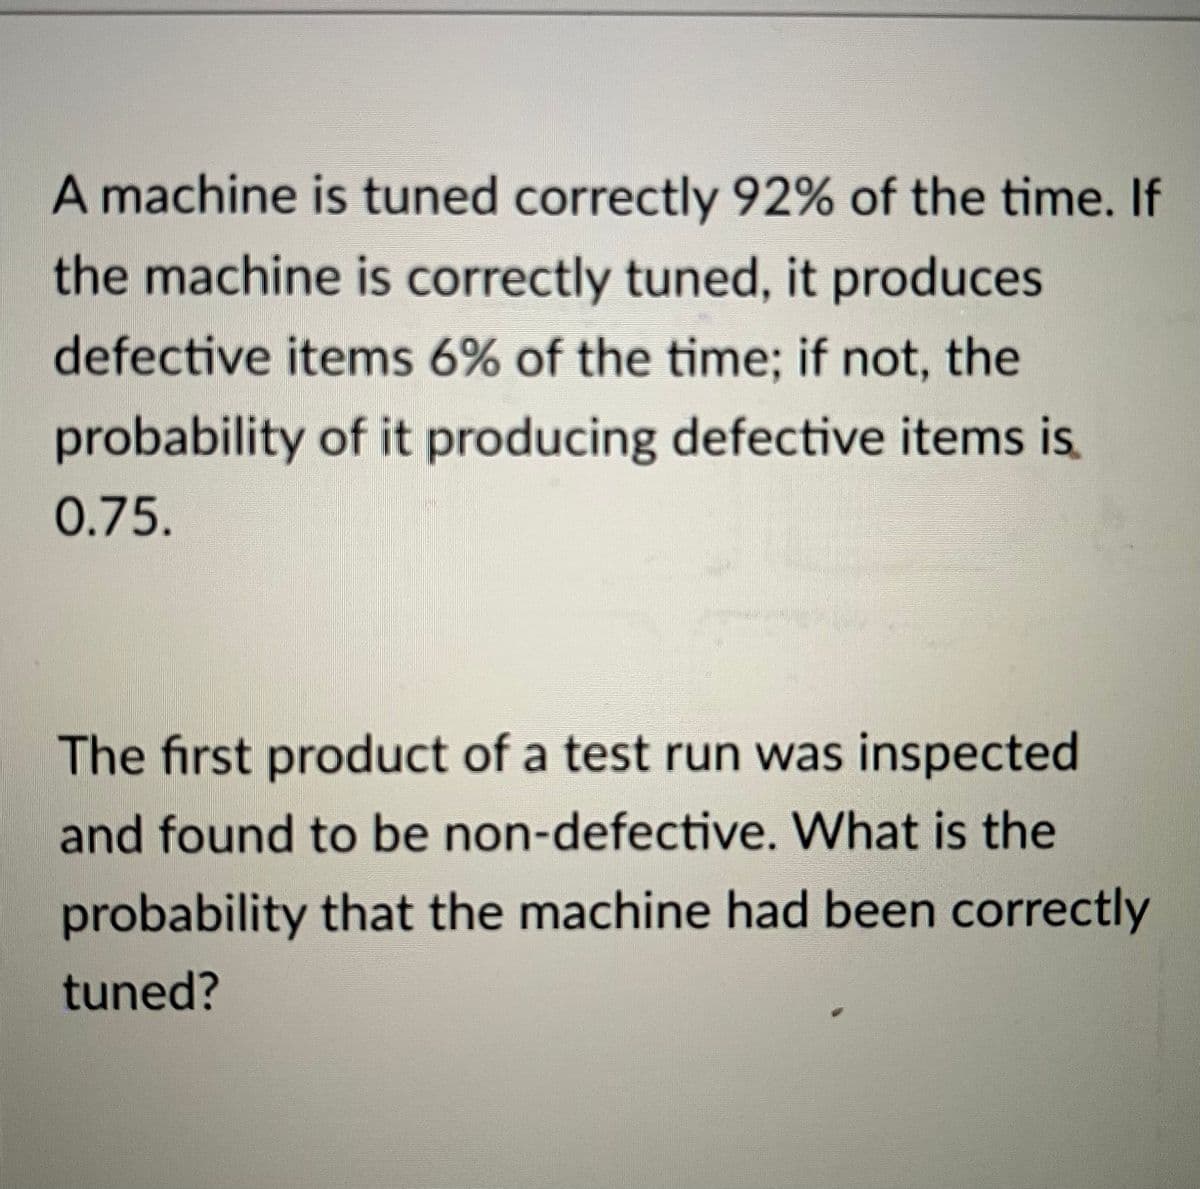 A machine is tuned correctly 92% of the time. If
the machine is correctly tuned, it produces
defective items 6% of the time; if not, the
probability of it producing defective items is
0.75.
The first product of a test run was inspected
and found to be non-defective. What is the
probability that the machine had been correctly
tuned?